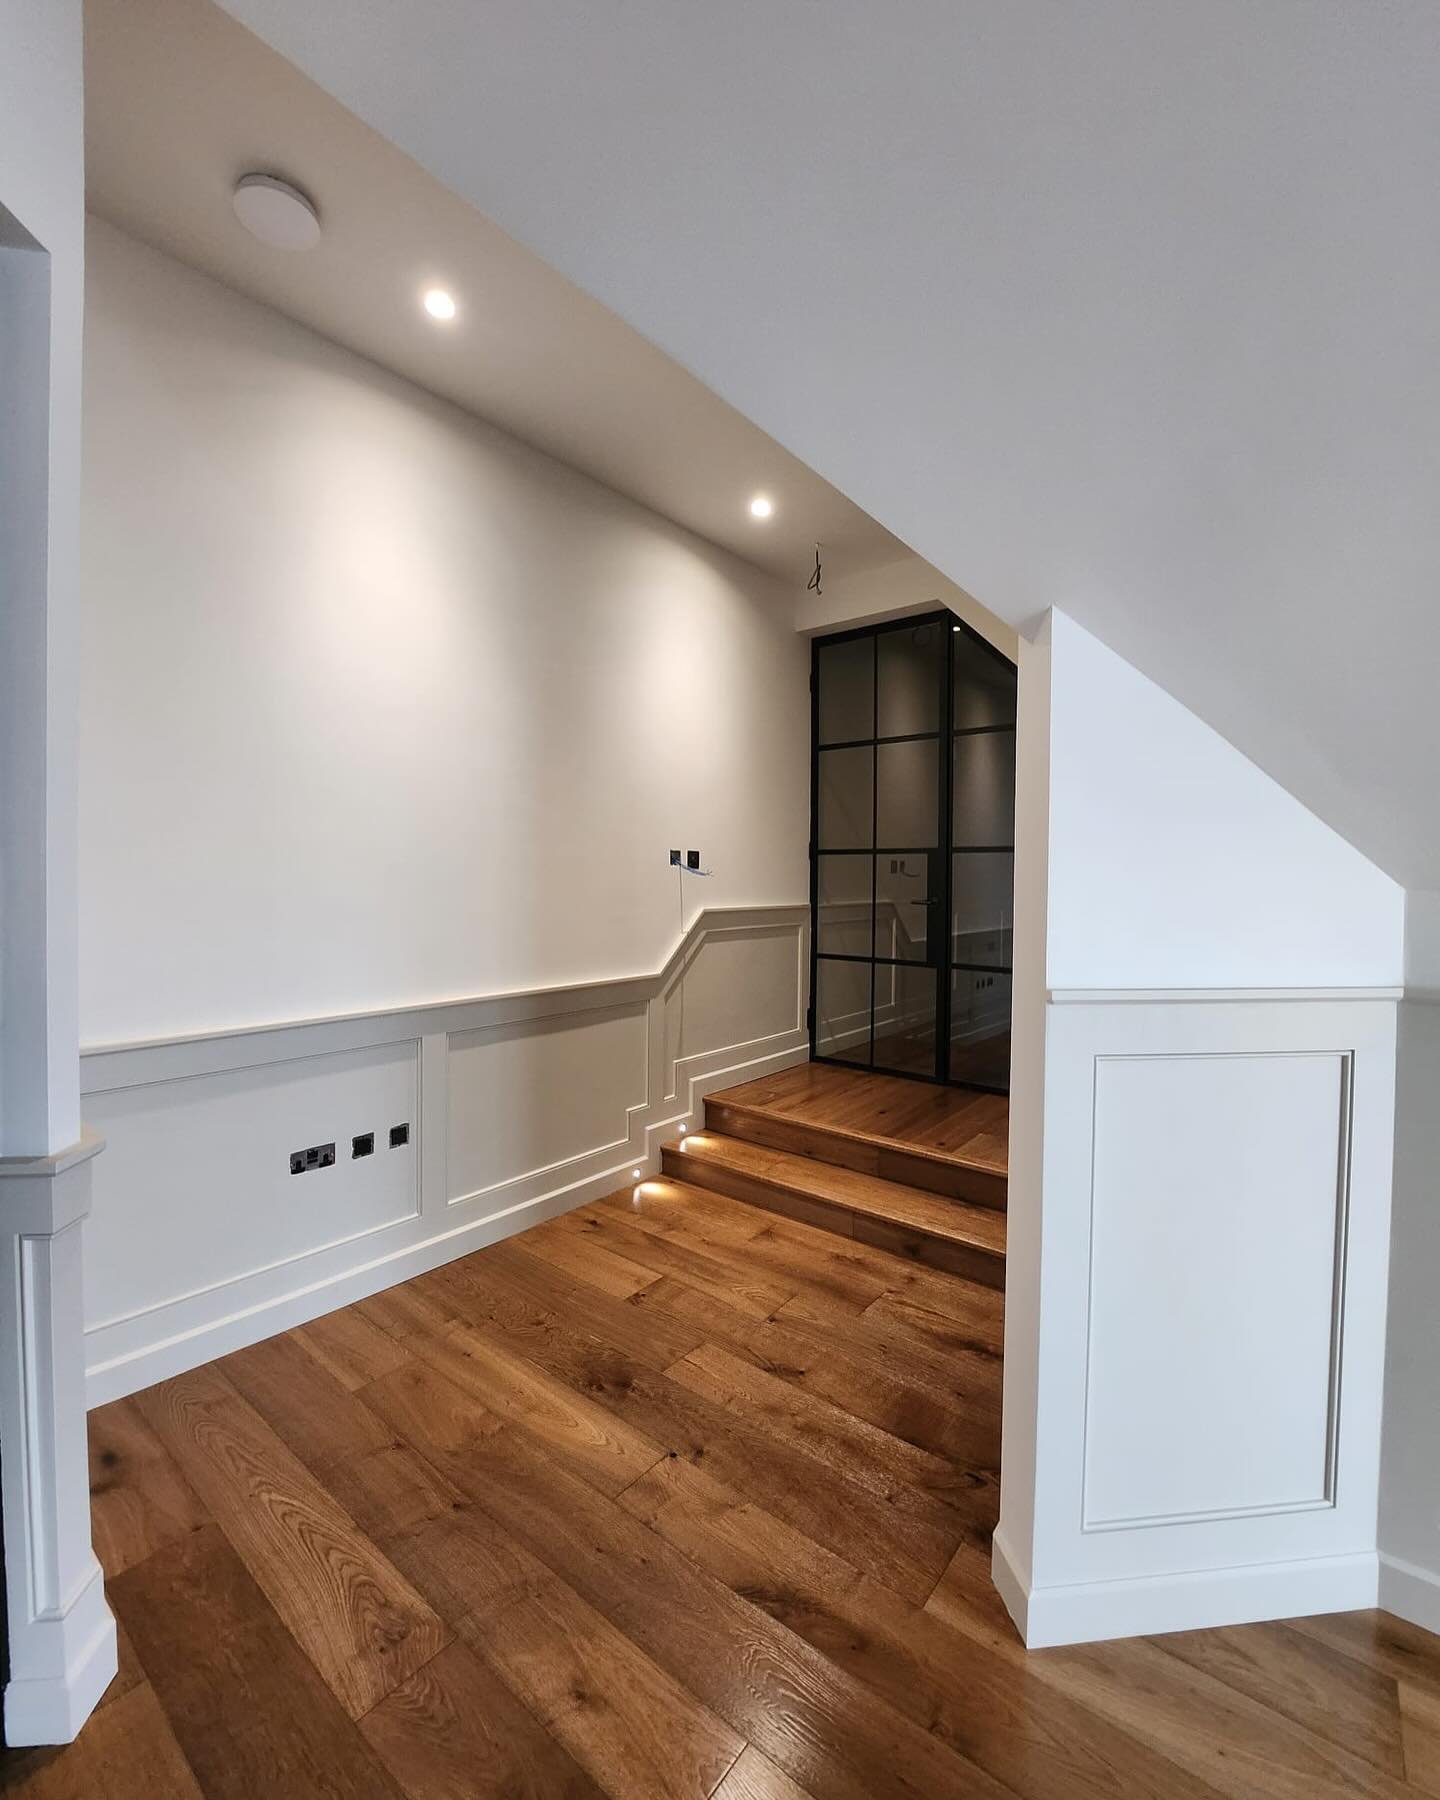 Another area finished by Uptown Interiors team on a project for @apmdesignandbuild .
Walls and woodwork done in @littlegreenepaintcompany Slaked Lime 105 and 150.